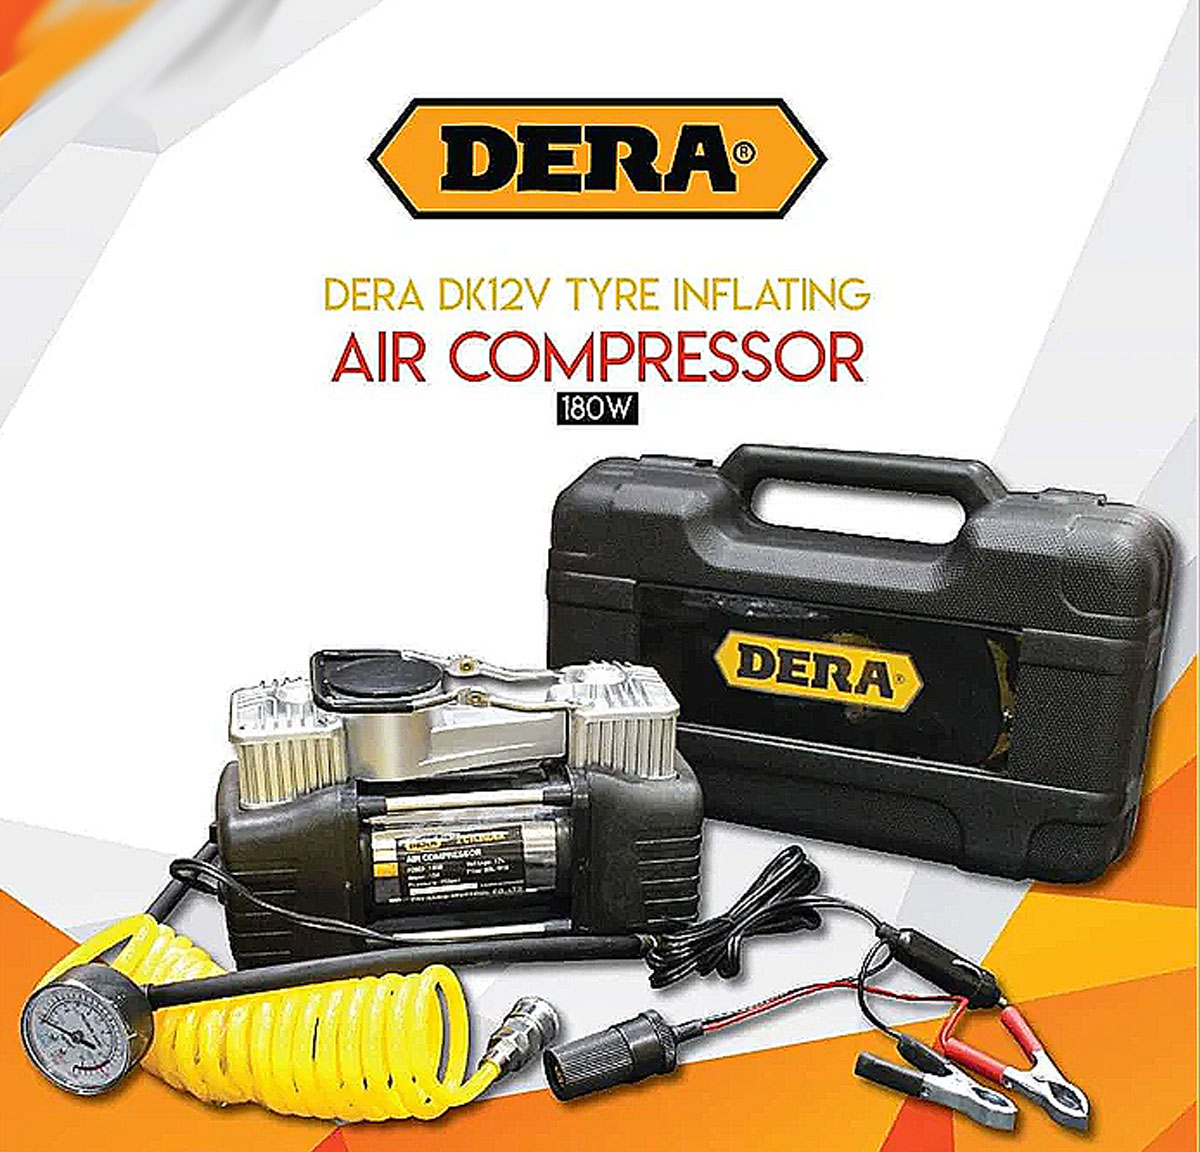 DERA DK12V DOUBLE CYLINDER TYRE INFLATOR AIR COMPRESSOR WITH TYRE REPAIR KIT - 180WATTS